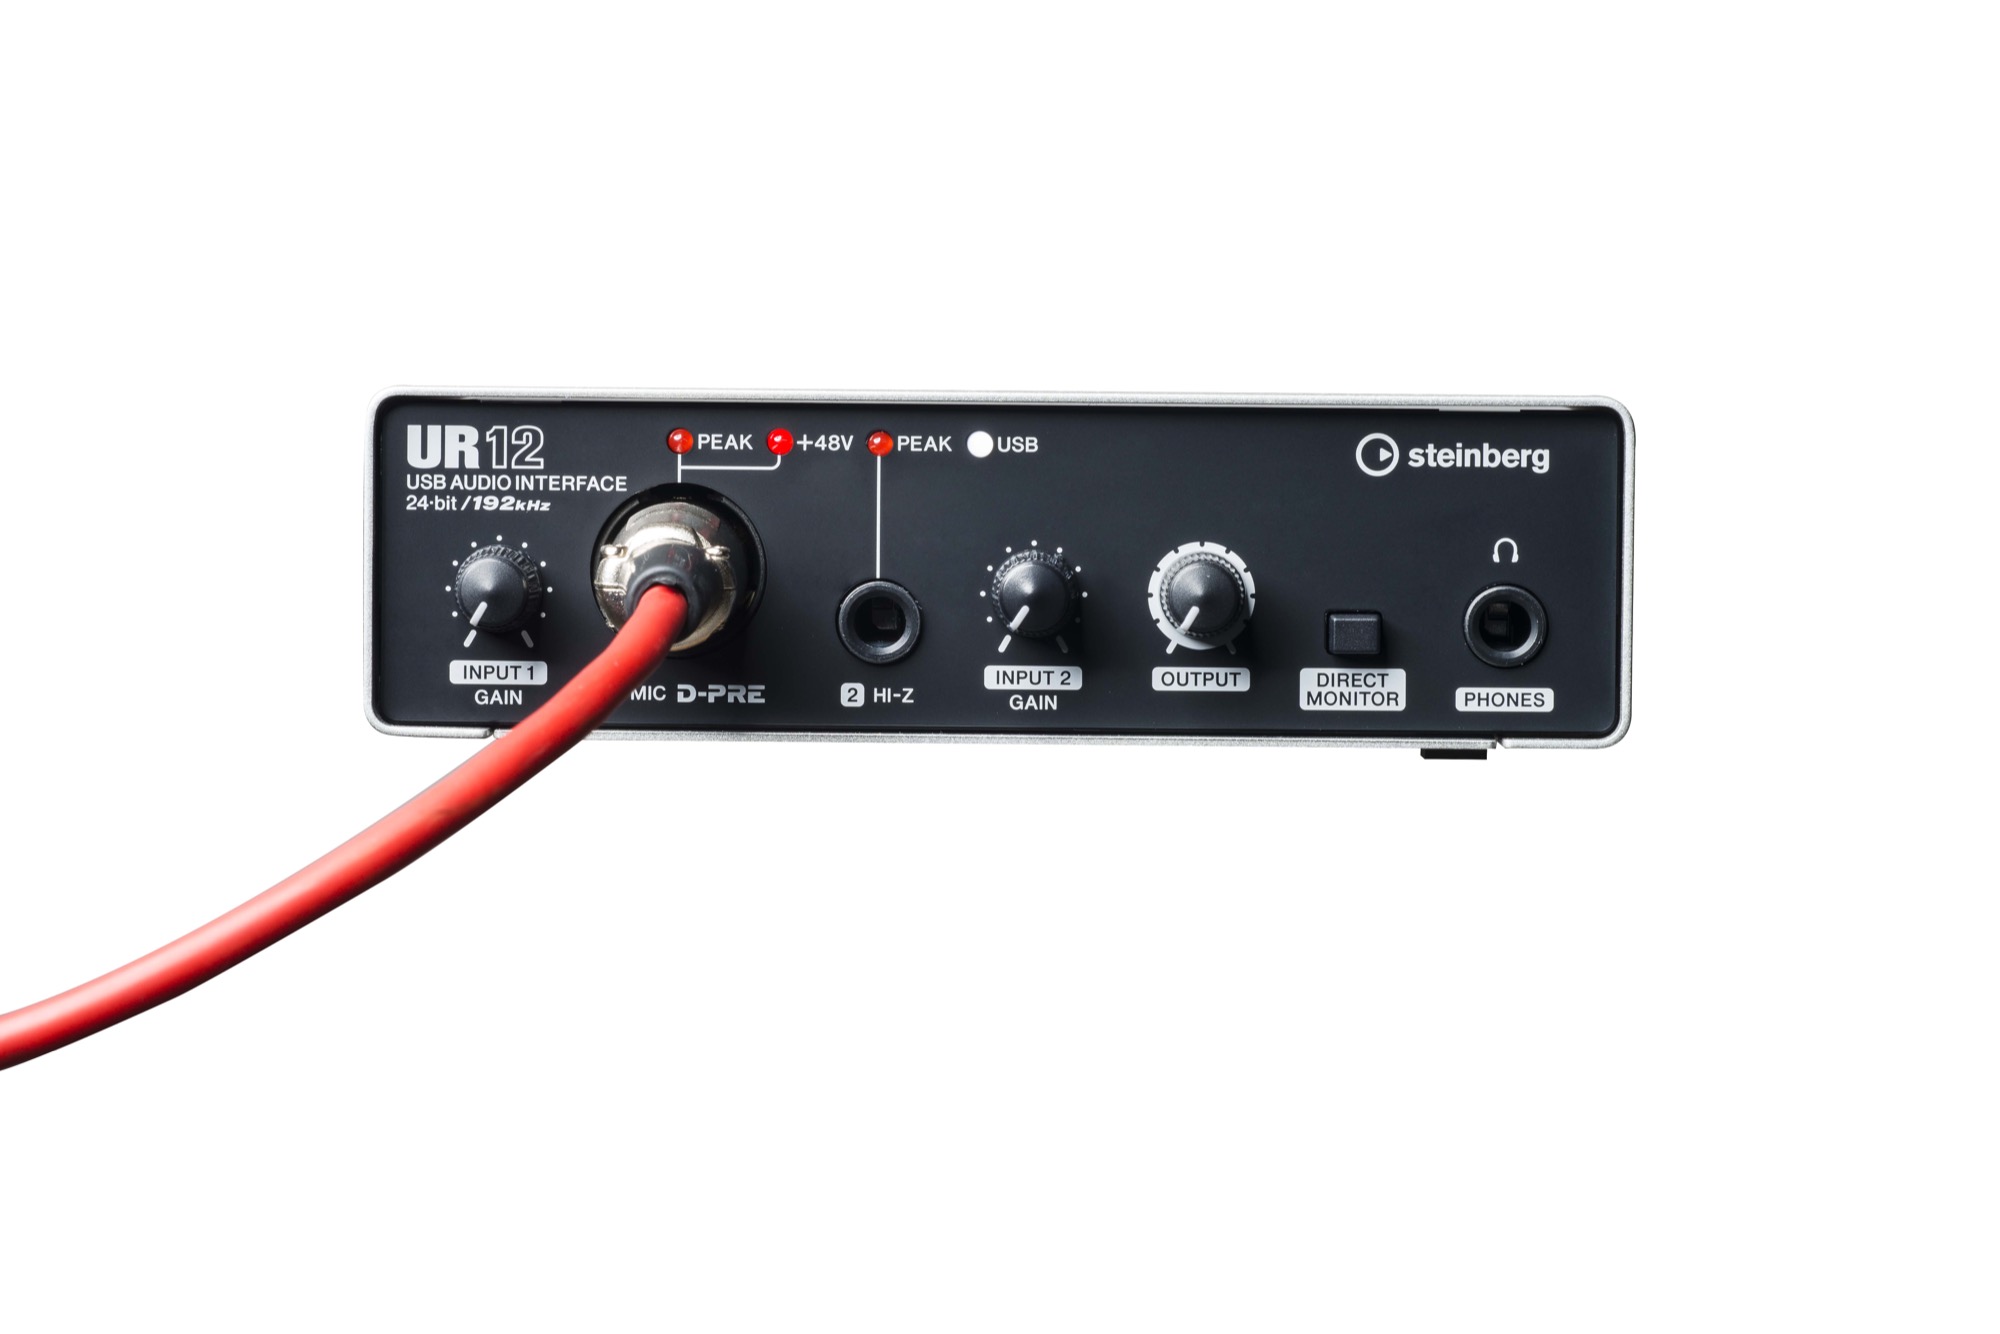 UR12 USB-Powered Audio/MIDI Interface 2x2 USB Audio Interface with 1x D-PRE  Mic Pre-Amp & 192kHz support